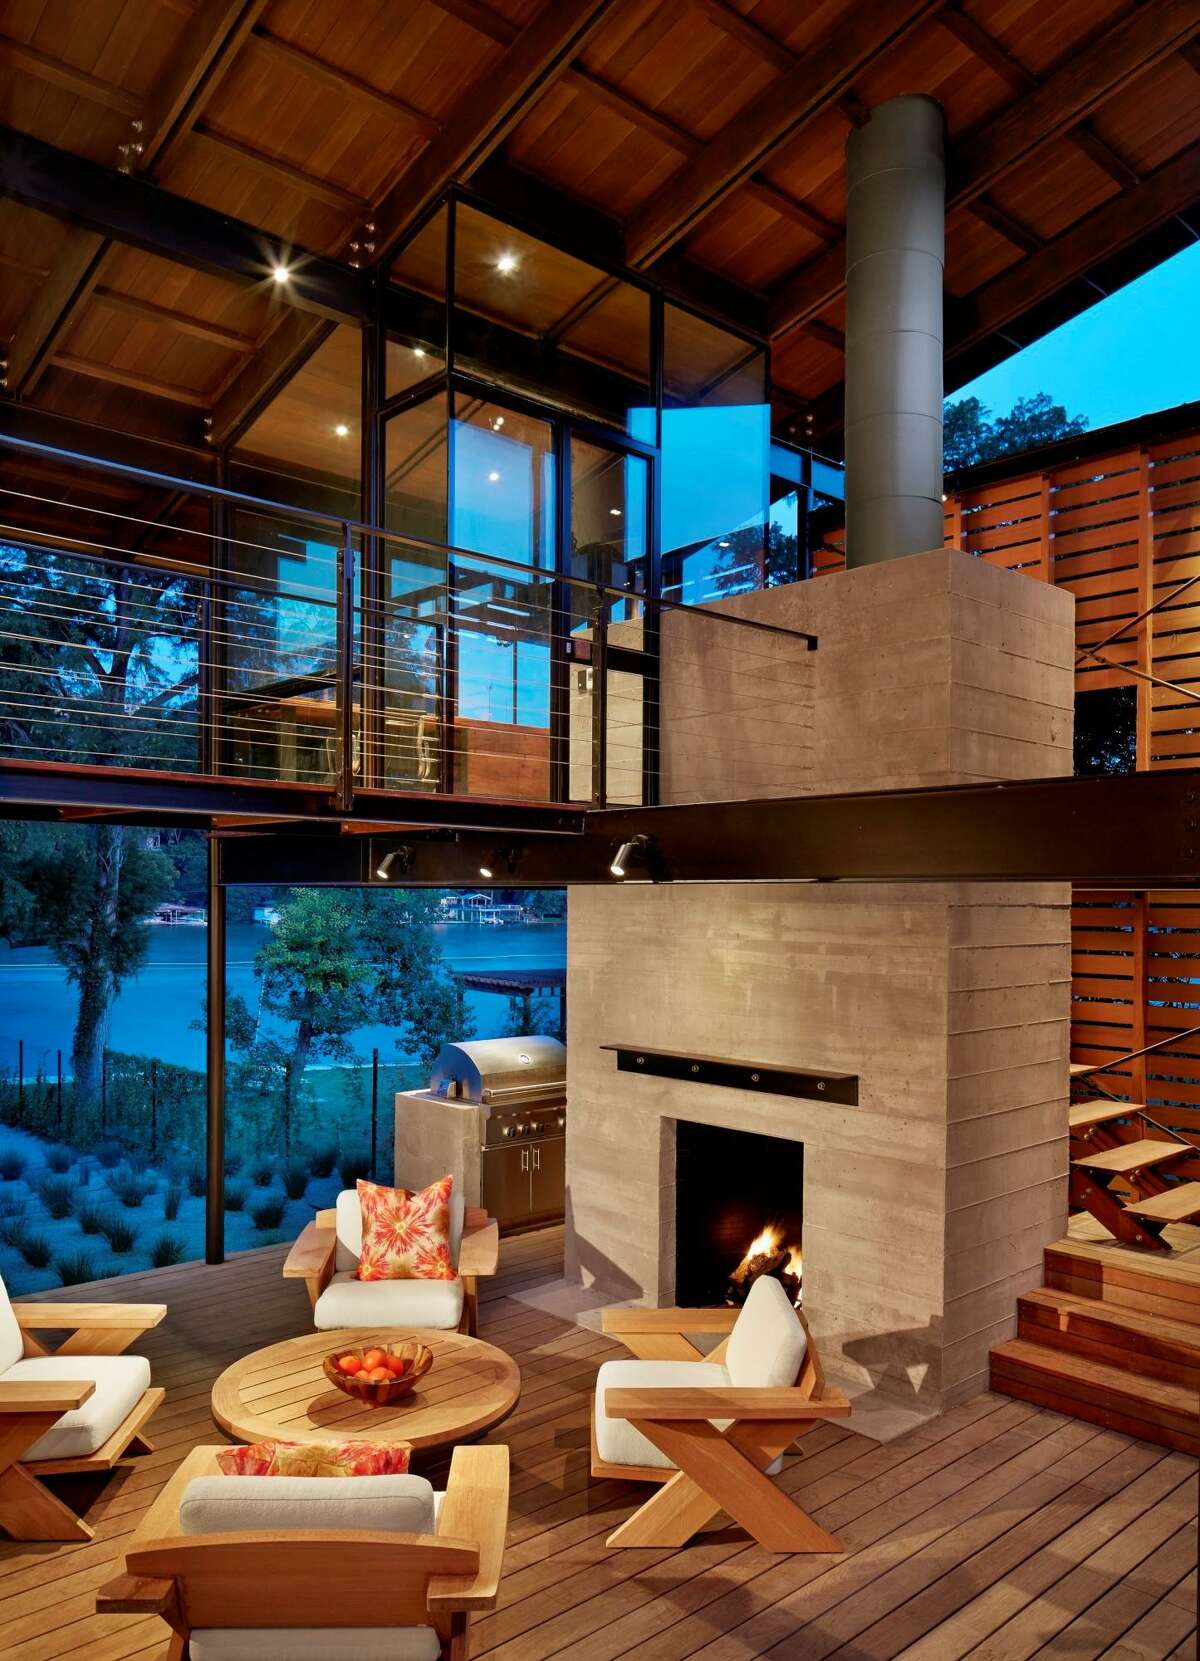 This backyard kitchen has two levels, the lower for cooking and entertaining, the upper, a glassed-in office for working with a view. The board-formed concrete fireplace is topped with a simple angled steel mantle. The lower room is open-air to catch the lake breezes and the furnishings are from Sutherland.